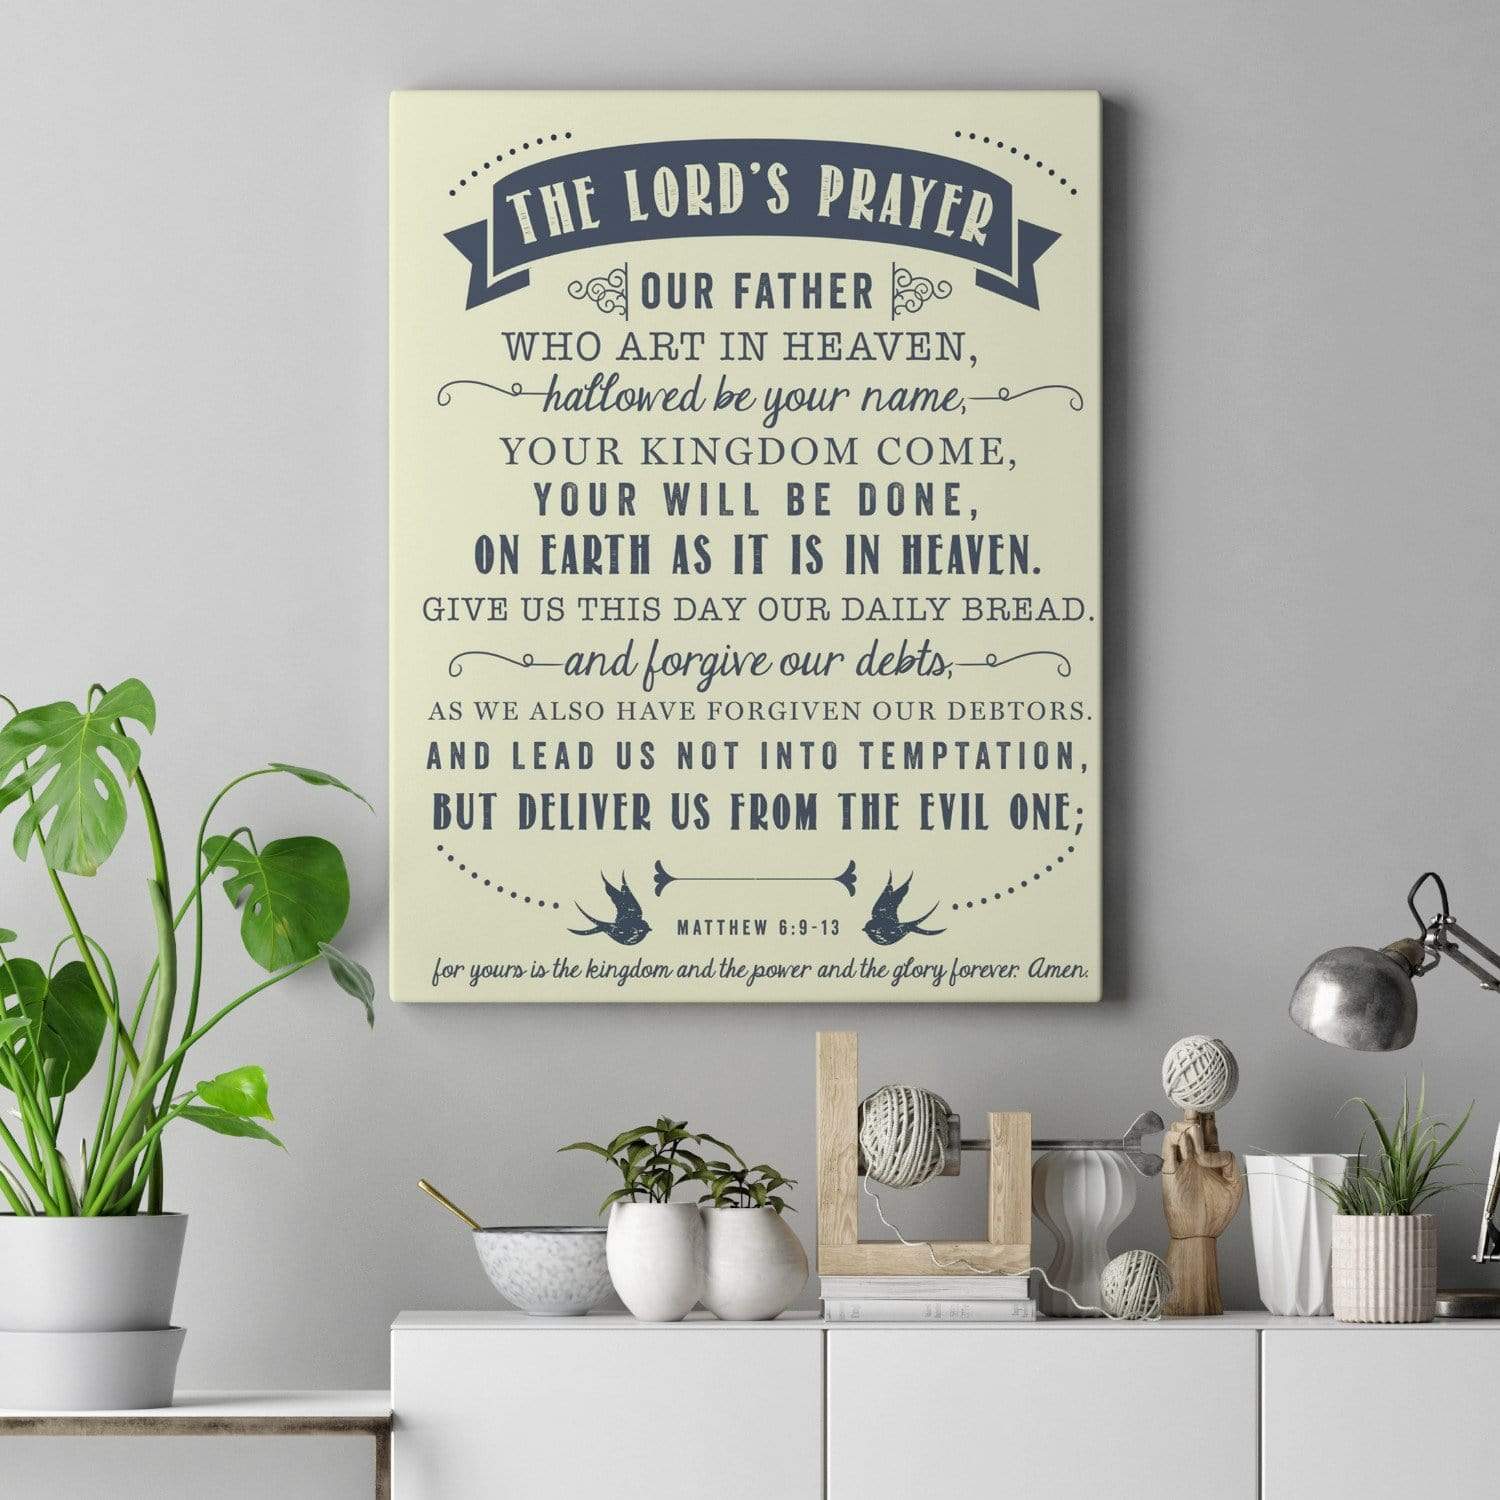 Living Words Wall Decor The Lord's prayer